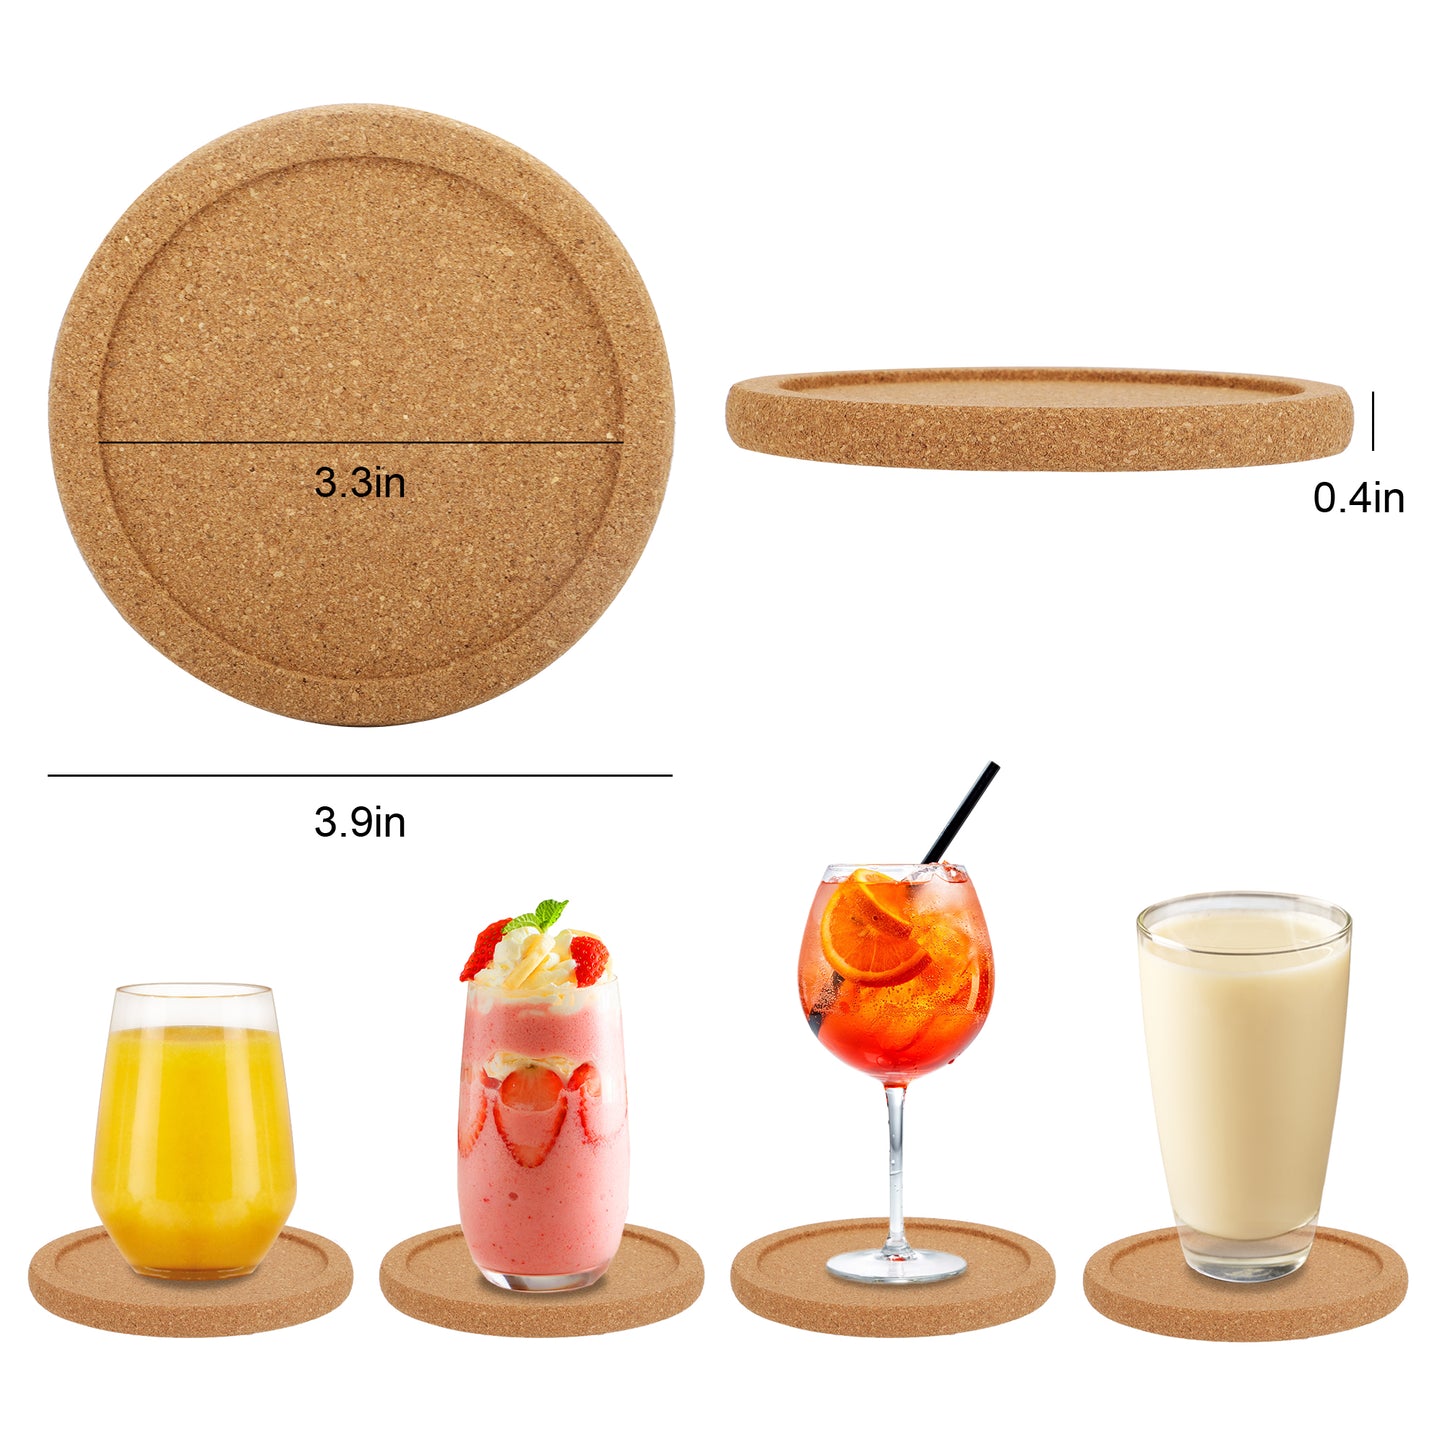 6 Pcs Round Cork Coasters - Cork Drink Coasters for  Heat Resistance and Tabletop Protection